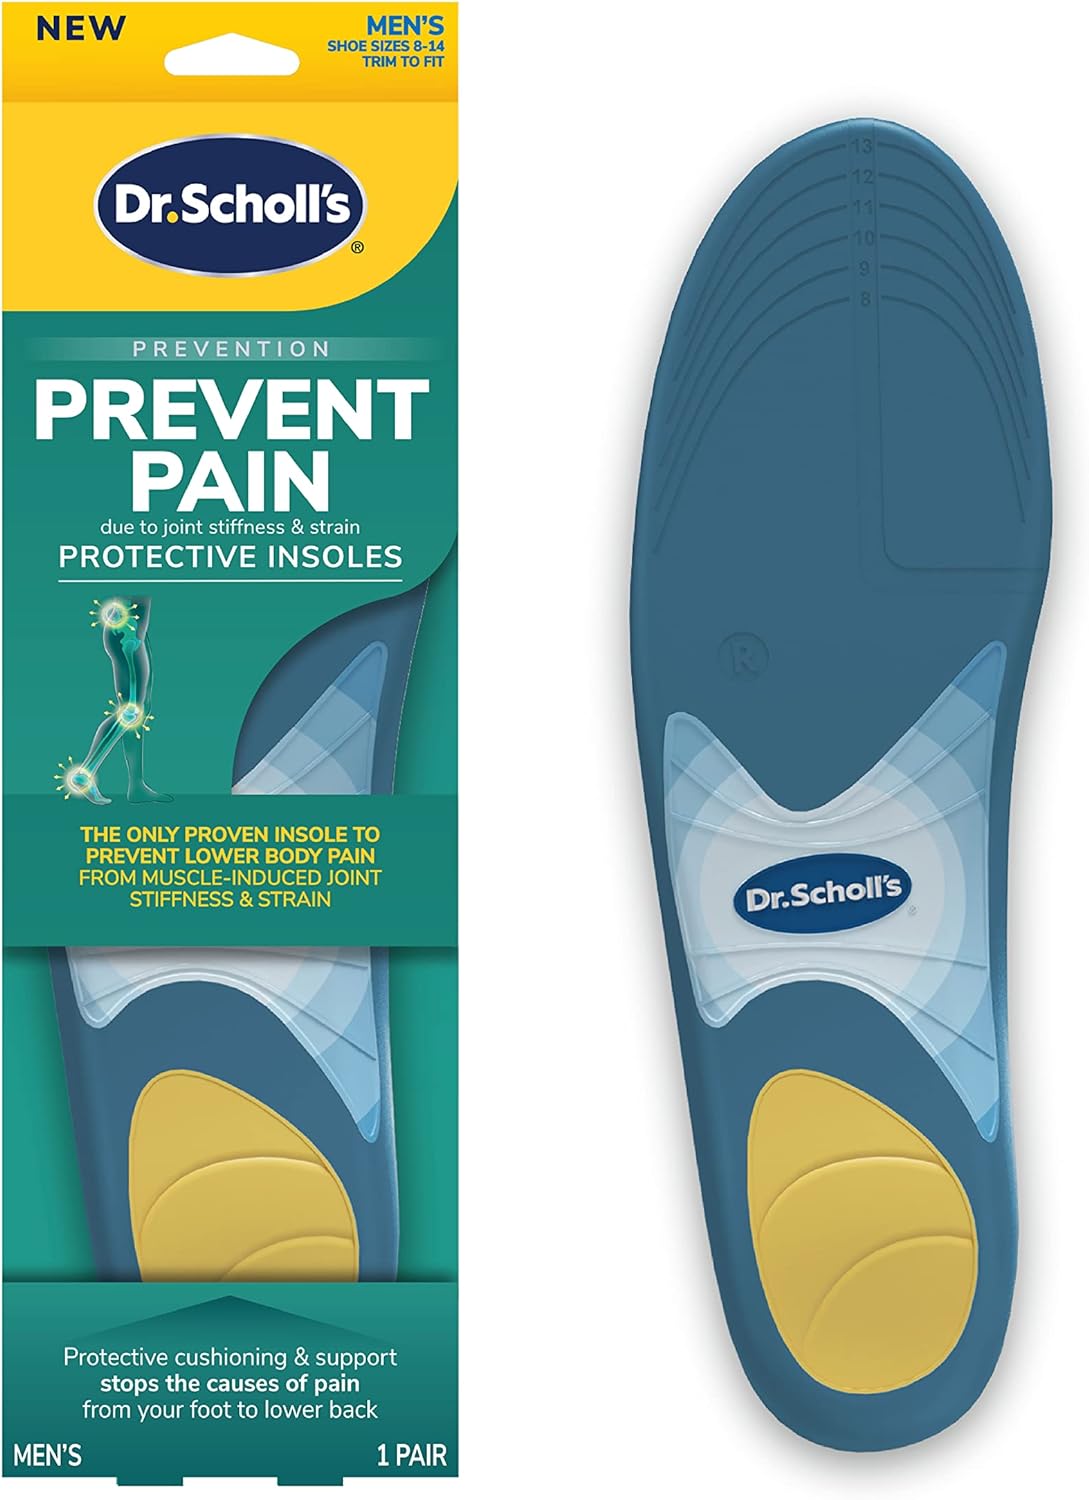 Dr. Scholls Prevent Pain Lower Body Protective Insoles, 1 Pair, Mens 8-14, Protects Against Foot, Knee, Heel, and Lower Back Pain, Trim to Fit Inserts